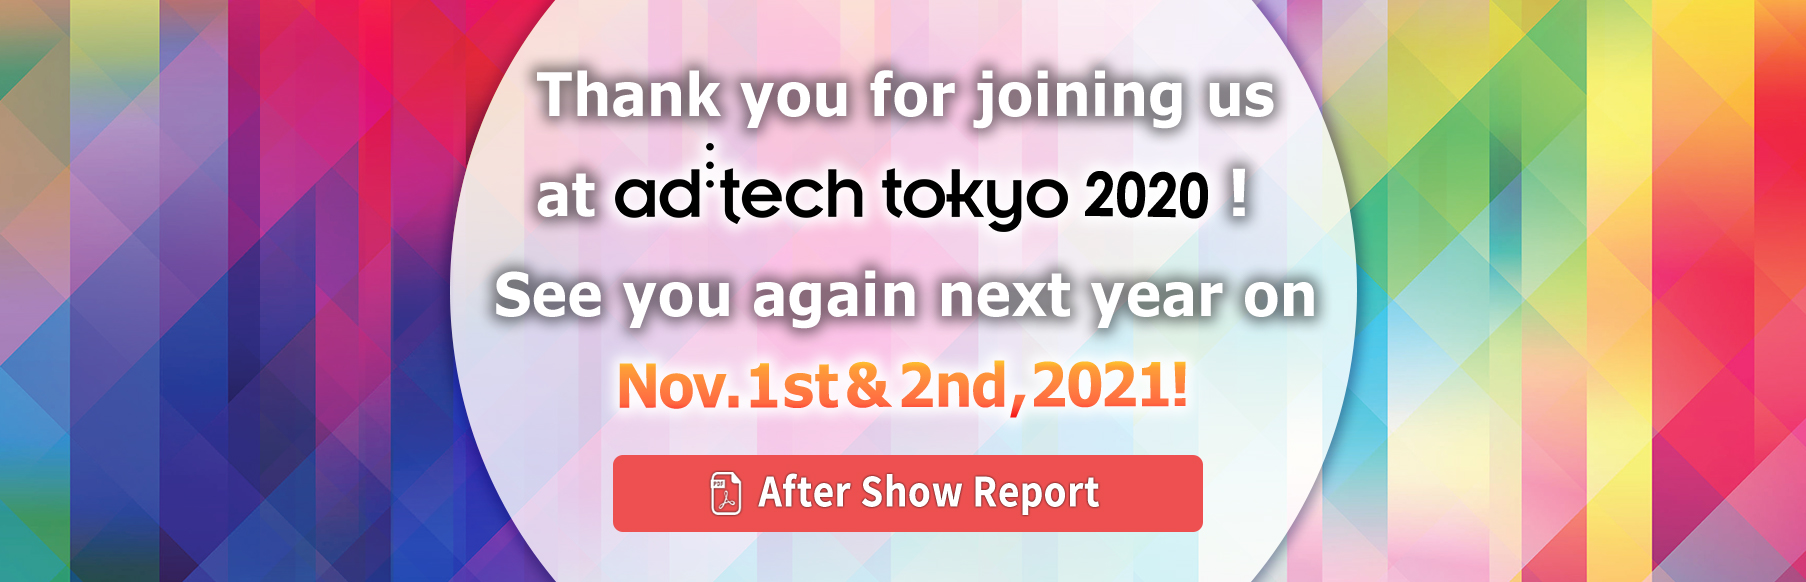 Thank you for joining us at ad:tech tokyo！See you again next year on Nov.1st & 2nd,2021！